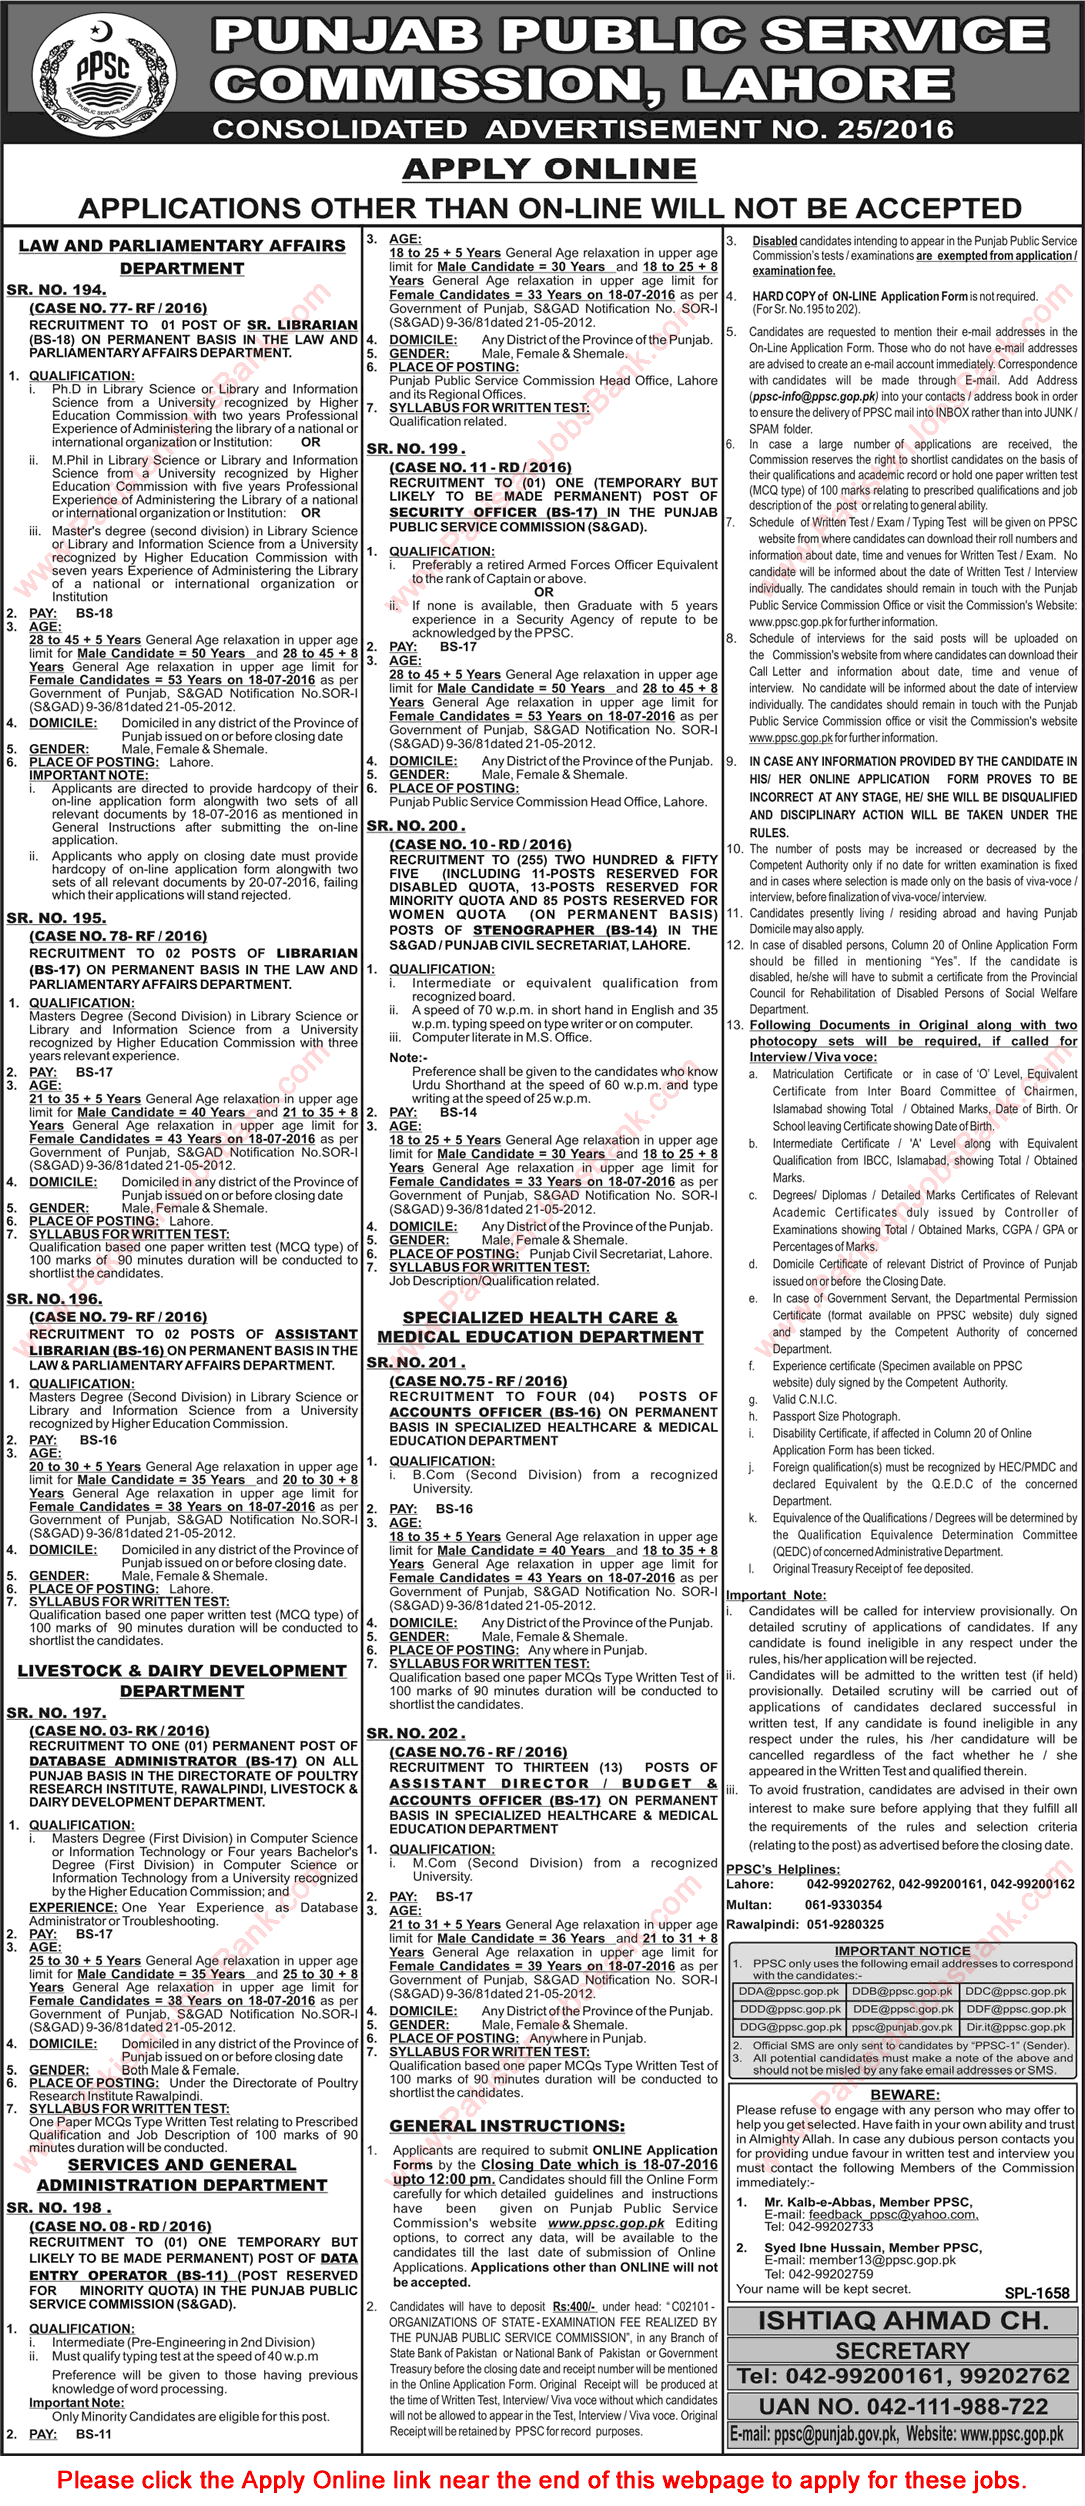 PPSC Jobs July 2016 Consolidated Advertisement No 25/2016 Apply Online Latest